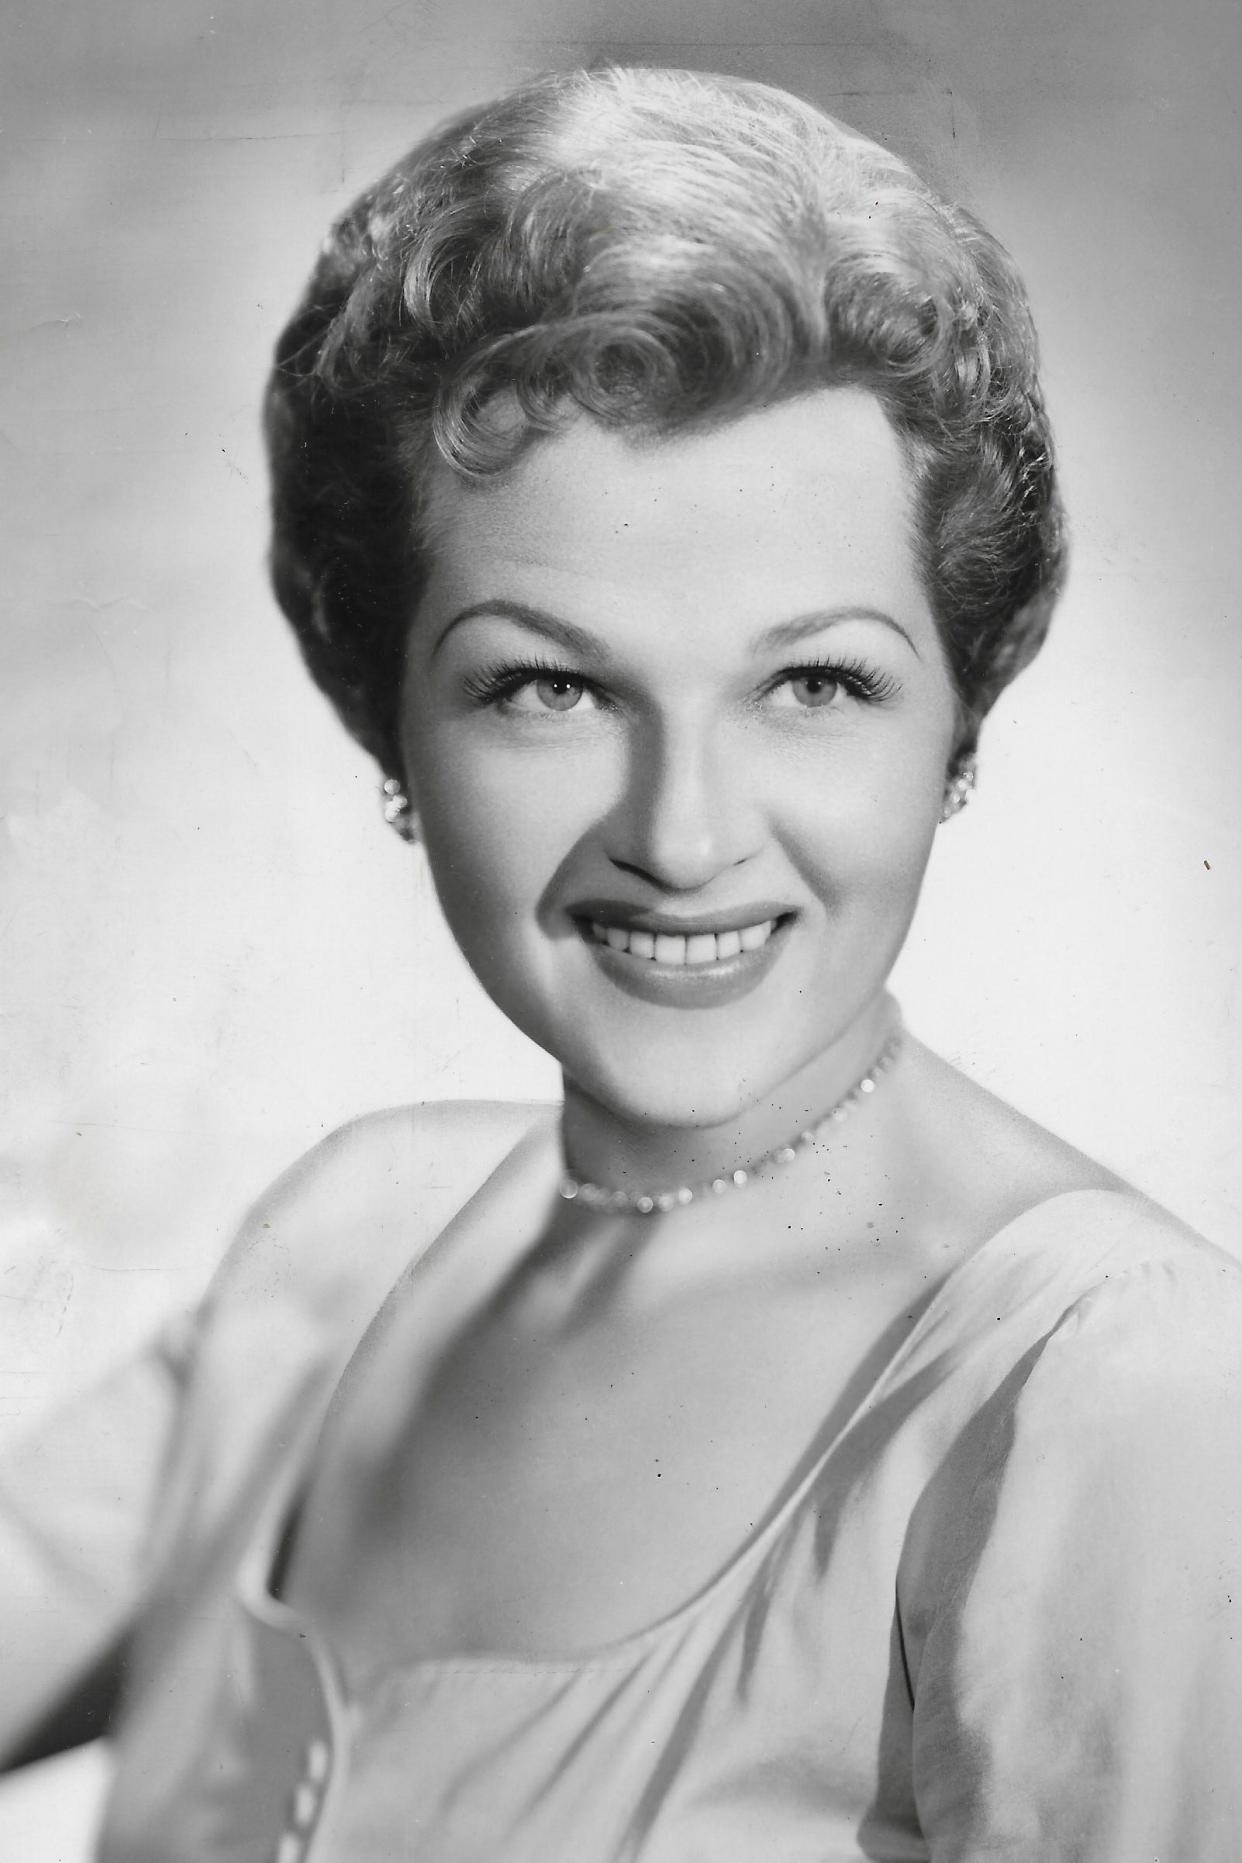 Jo Stafford is the star of “The Jo Stafford Show” on CBS in the 1950s.